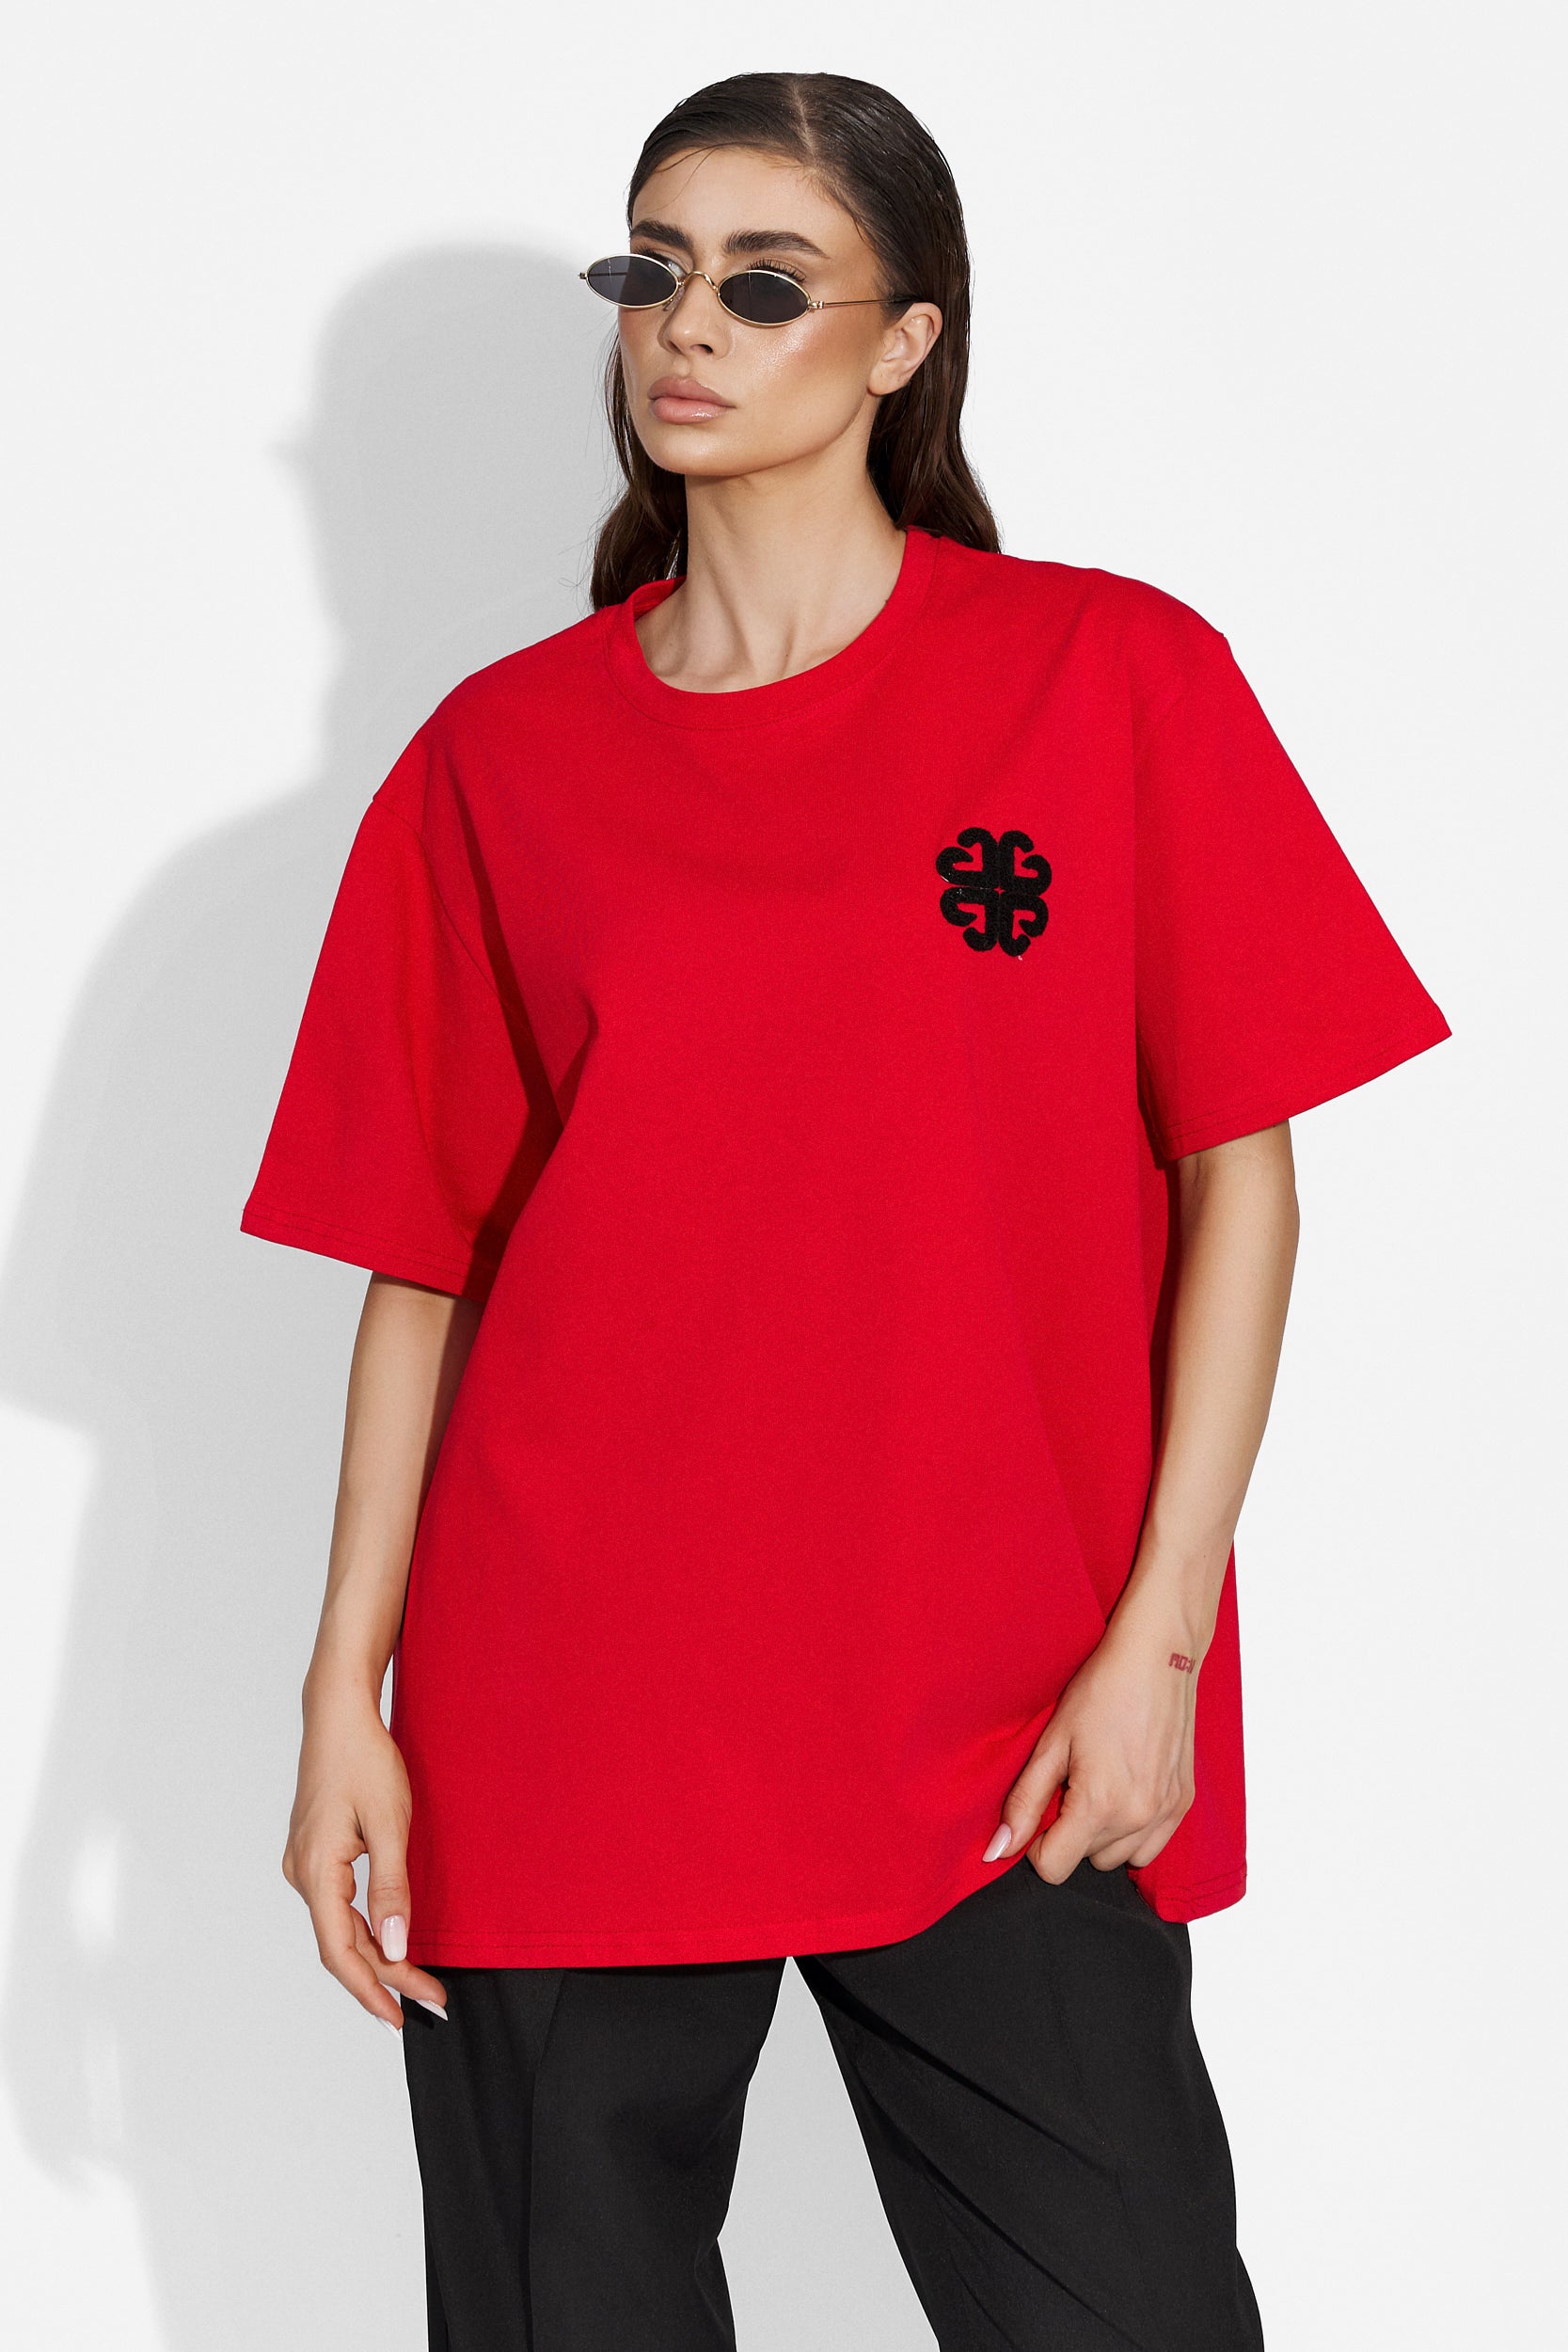 Forlany Bogas casual red ladies t-shirt